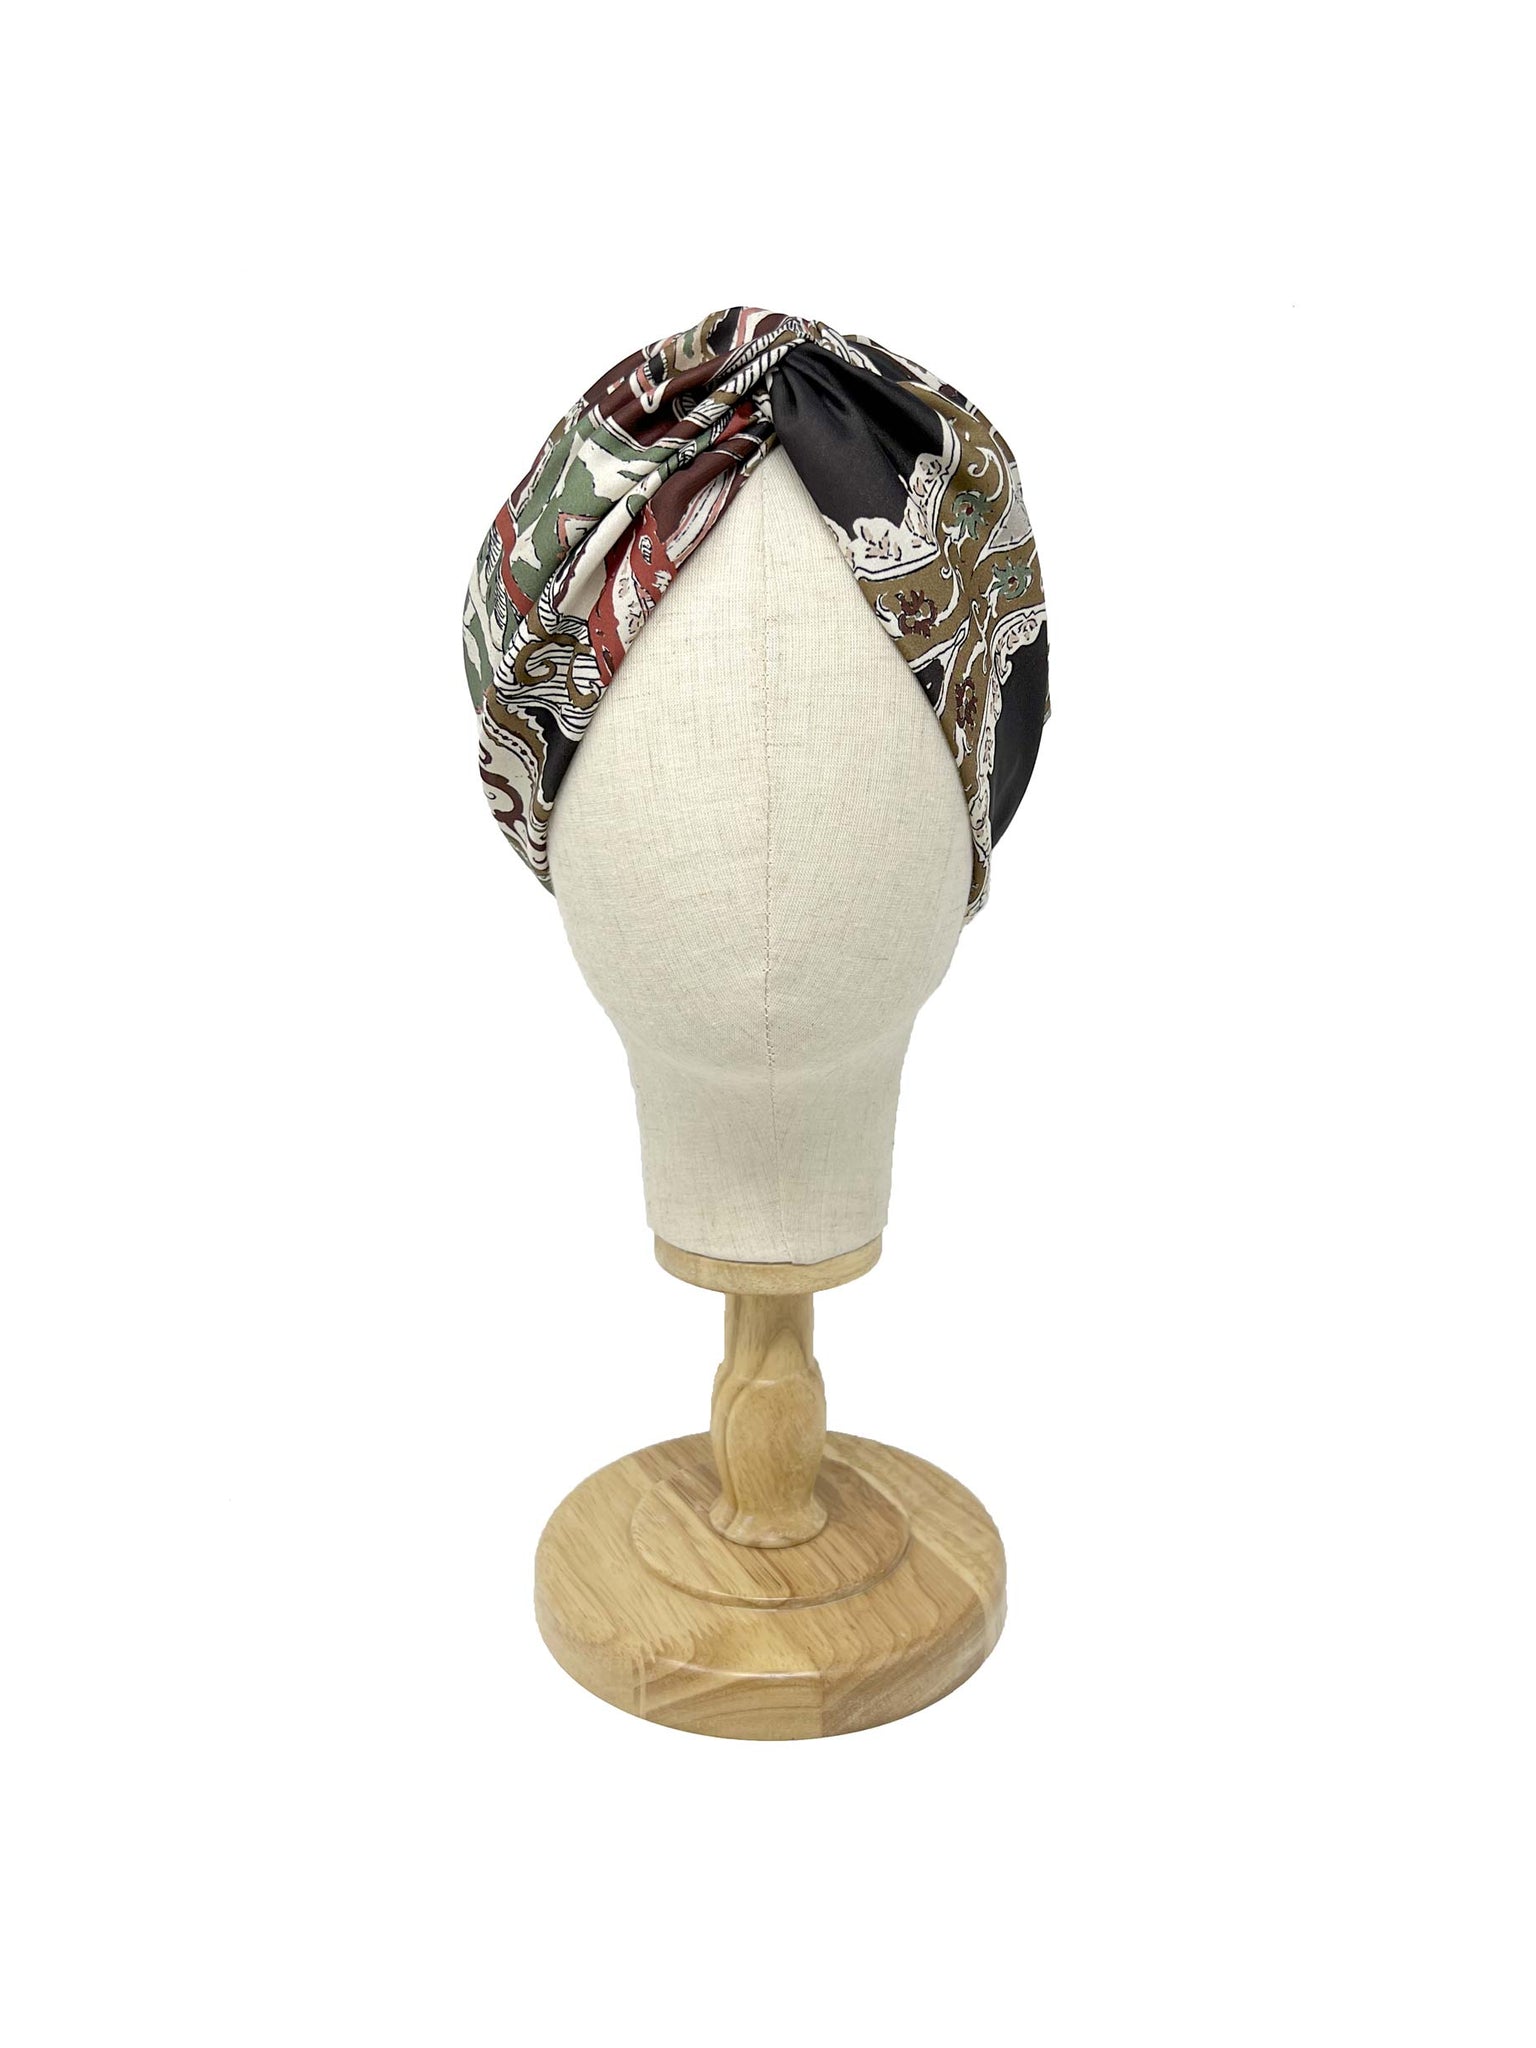 Sage green and brown cashmere patterned satin headband